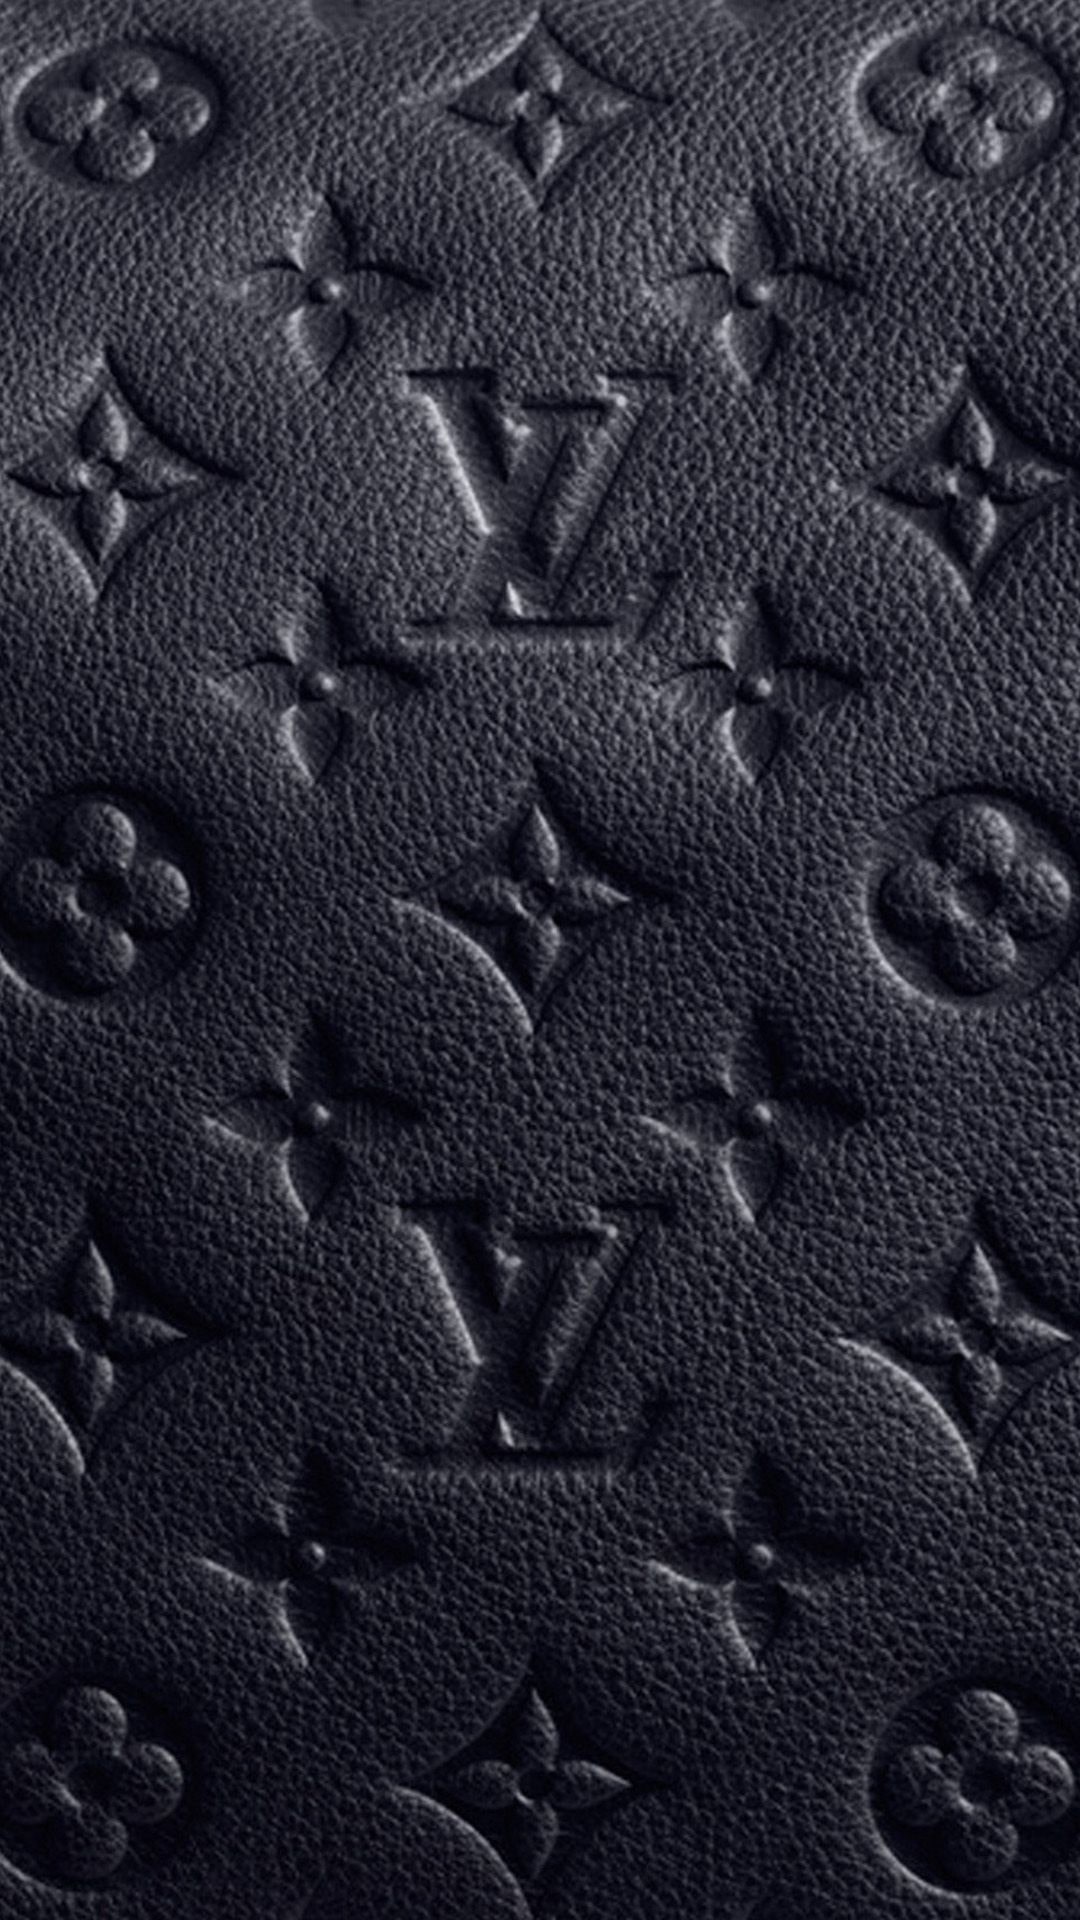 Download Experience Luxury with Louis Vuitton Wallpaper